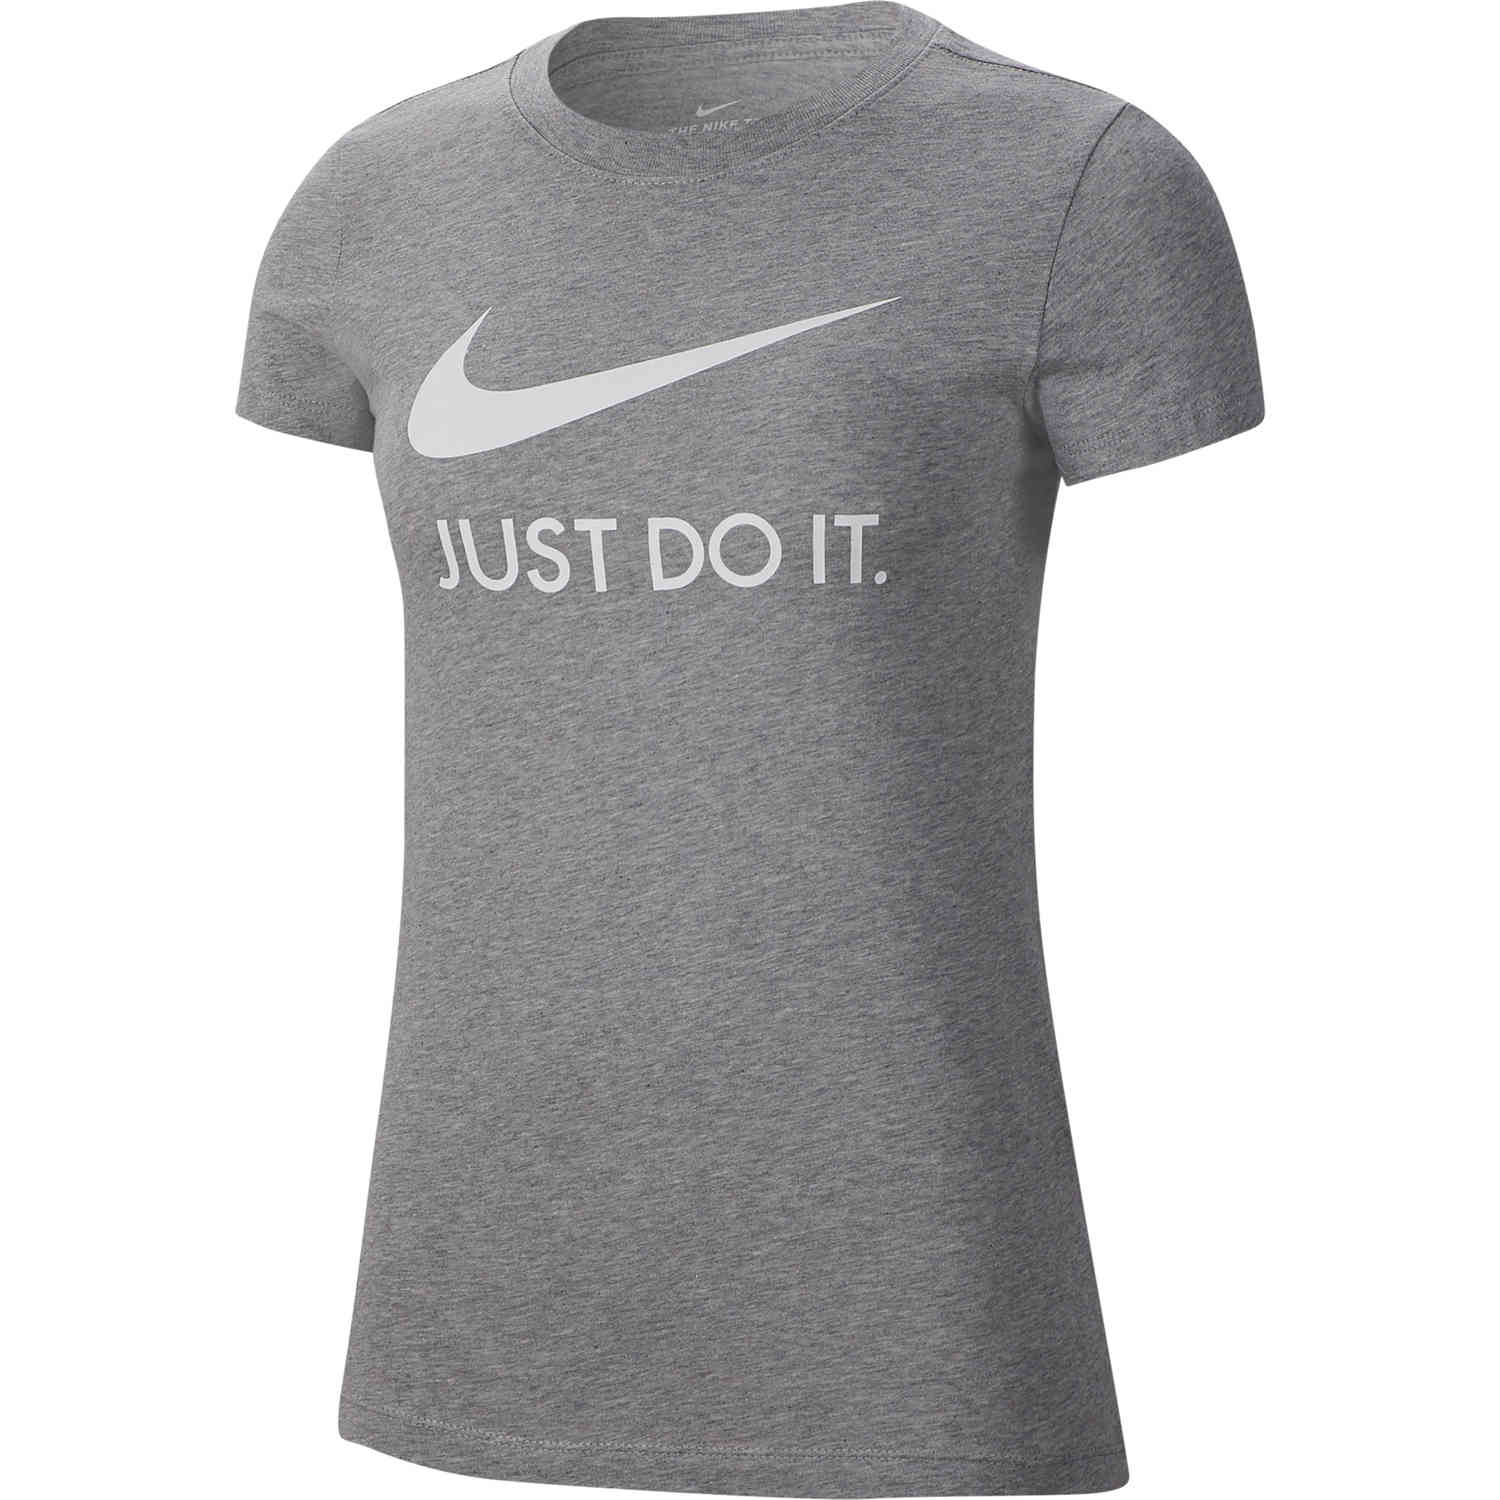 Buy > just do it shirt womens > in stock